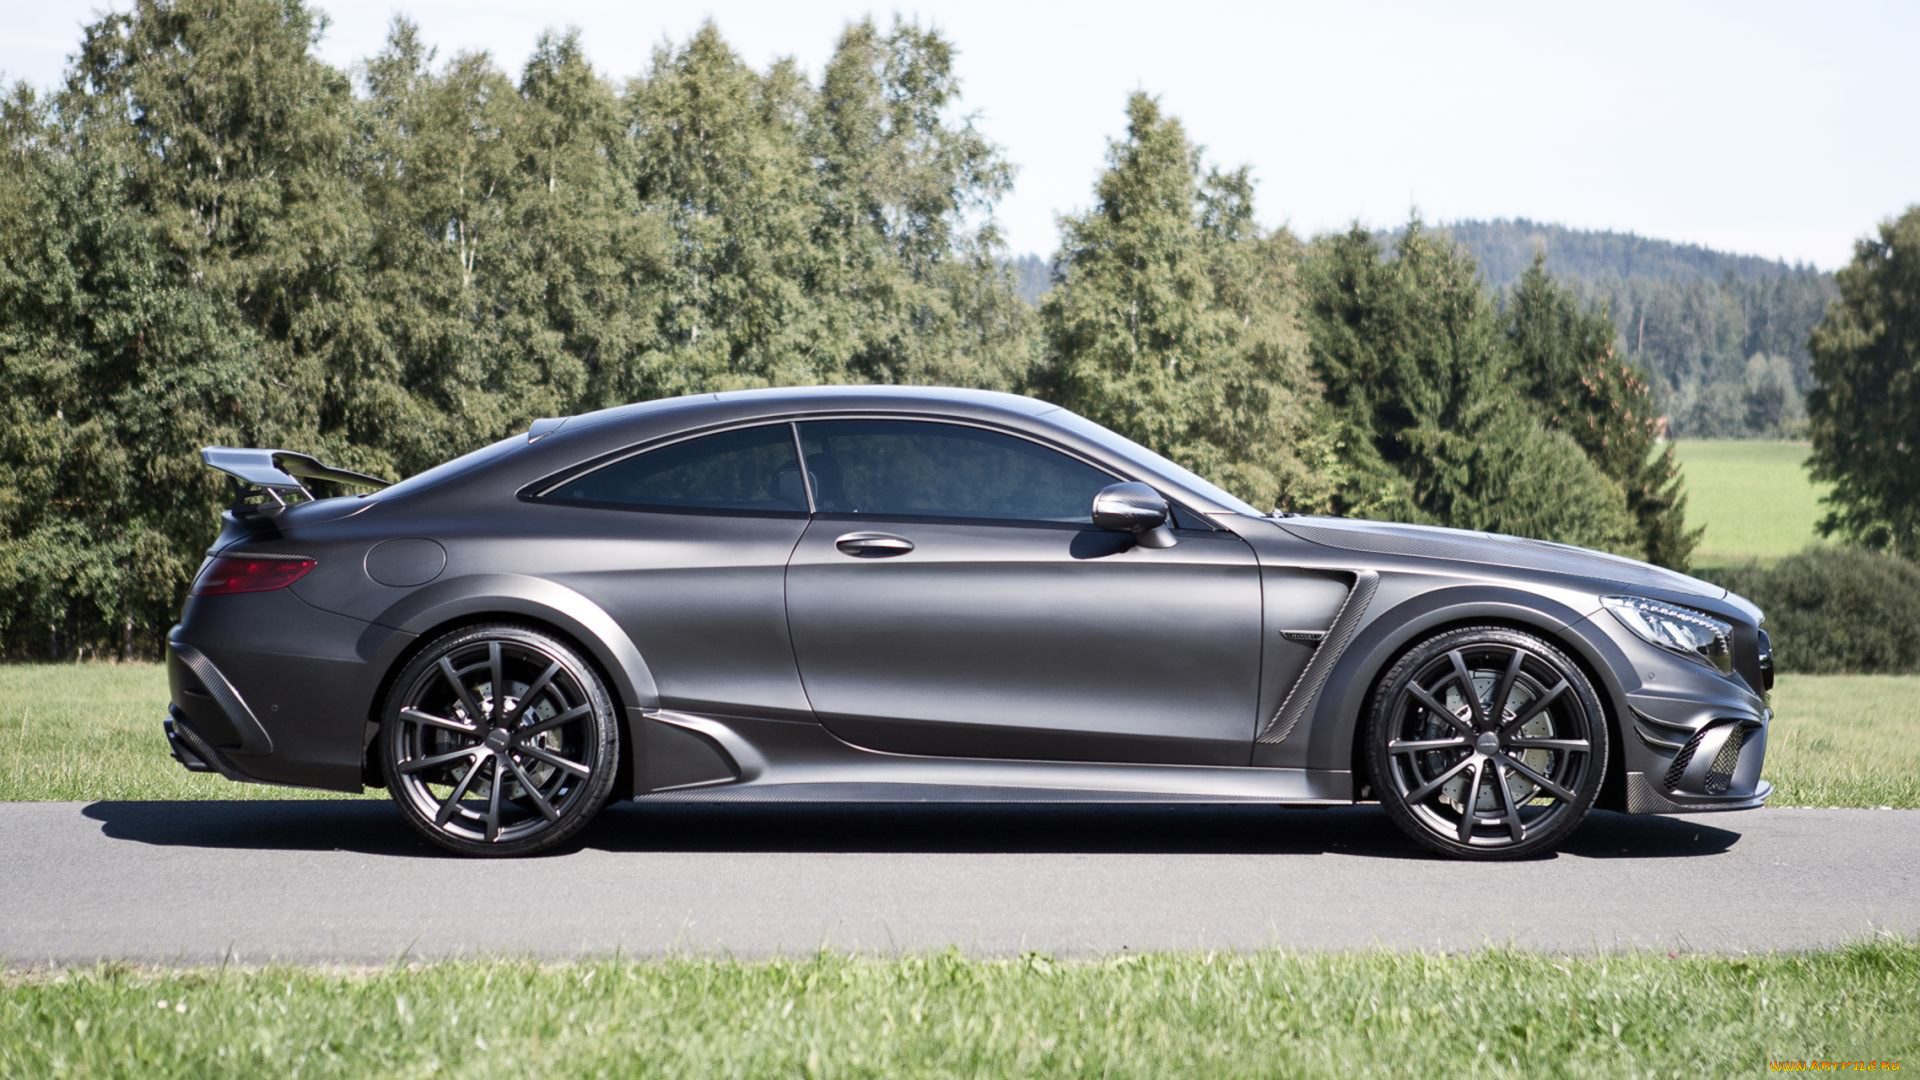 mansory, mercedes-benz, s63, amg, coupe, black, edition, 2015, автомобили, mercedes-benz, mansory, s63, amg, coupe, black, edition, 2015